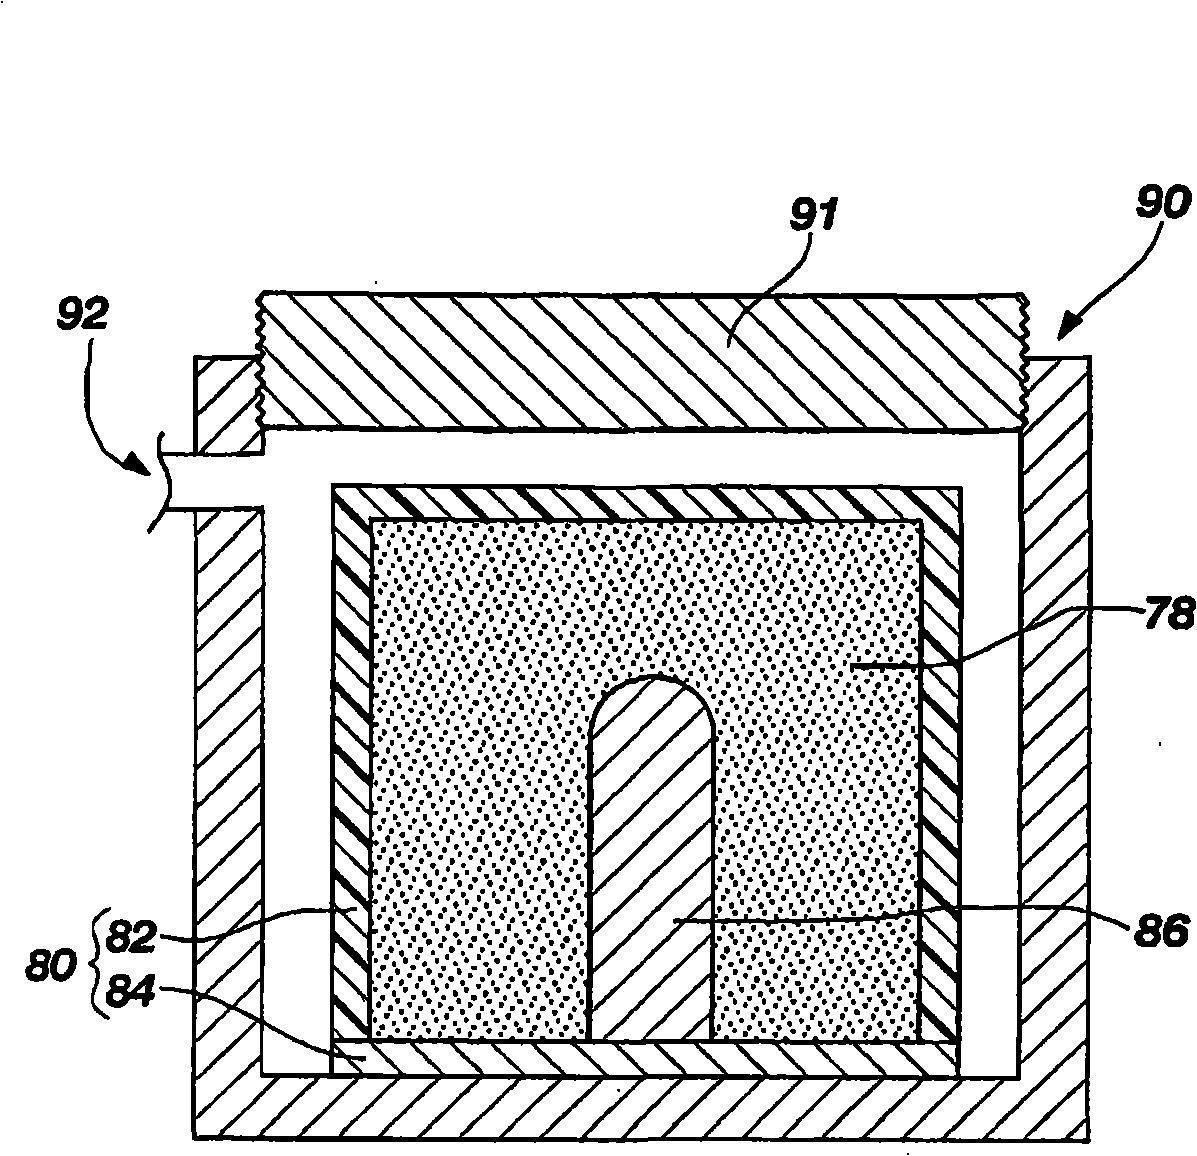 Earth-boring rotary drill bits and methods of manufacturing earth-boring rotary drill bits having particle-matrix composite bit bodies